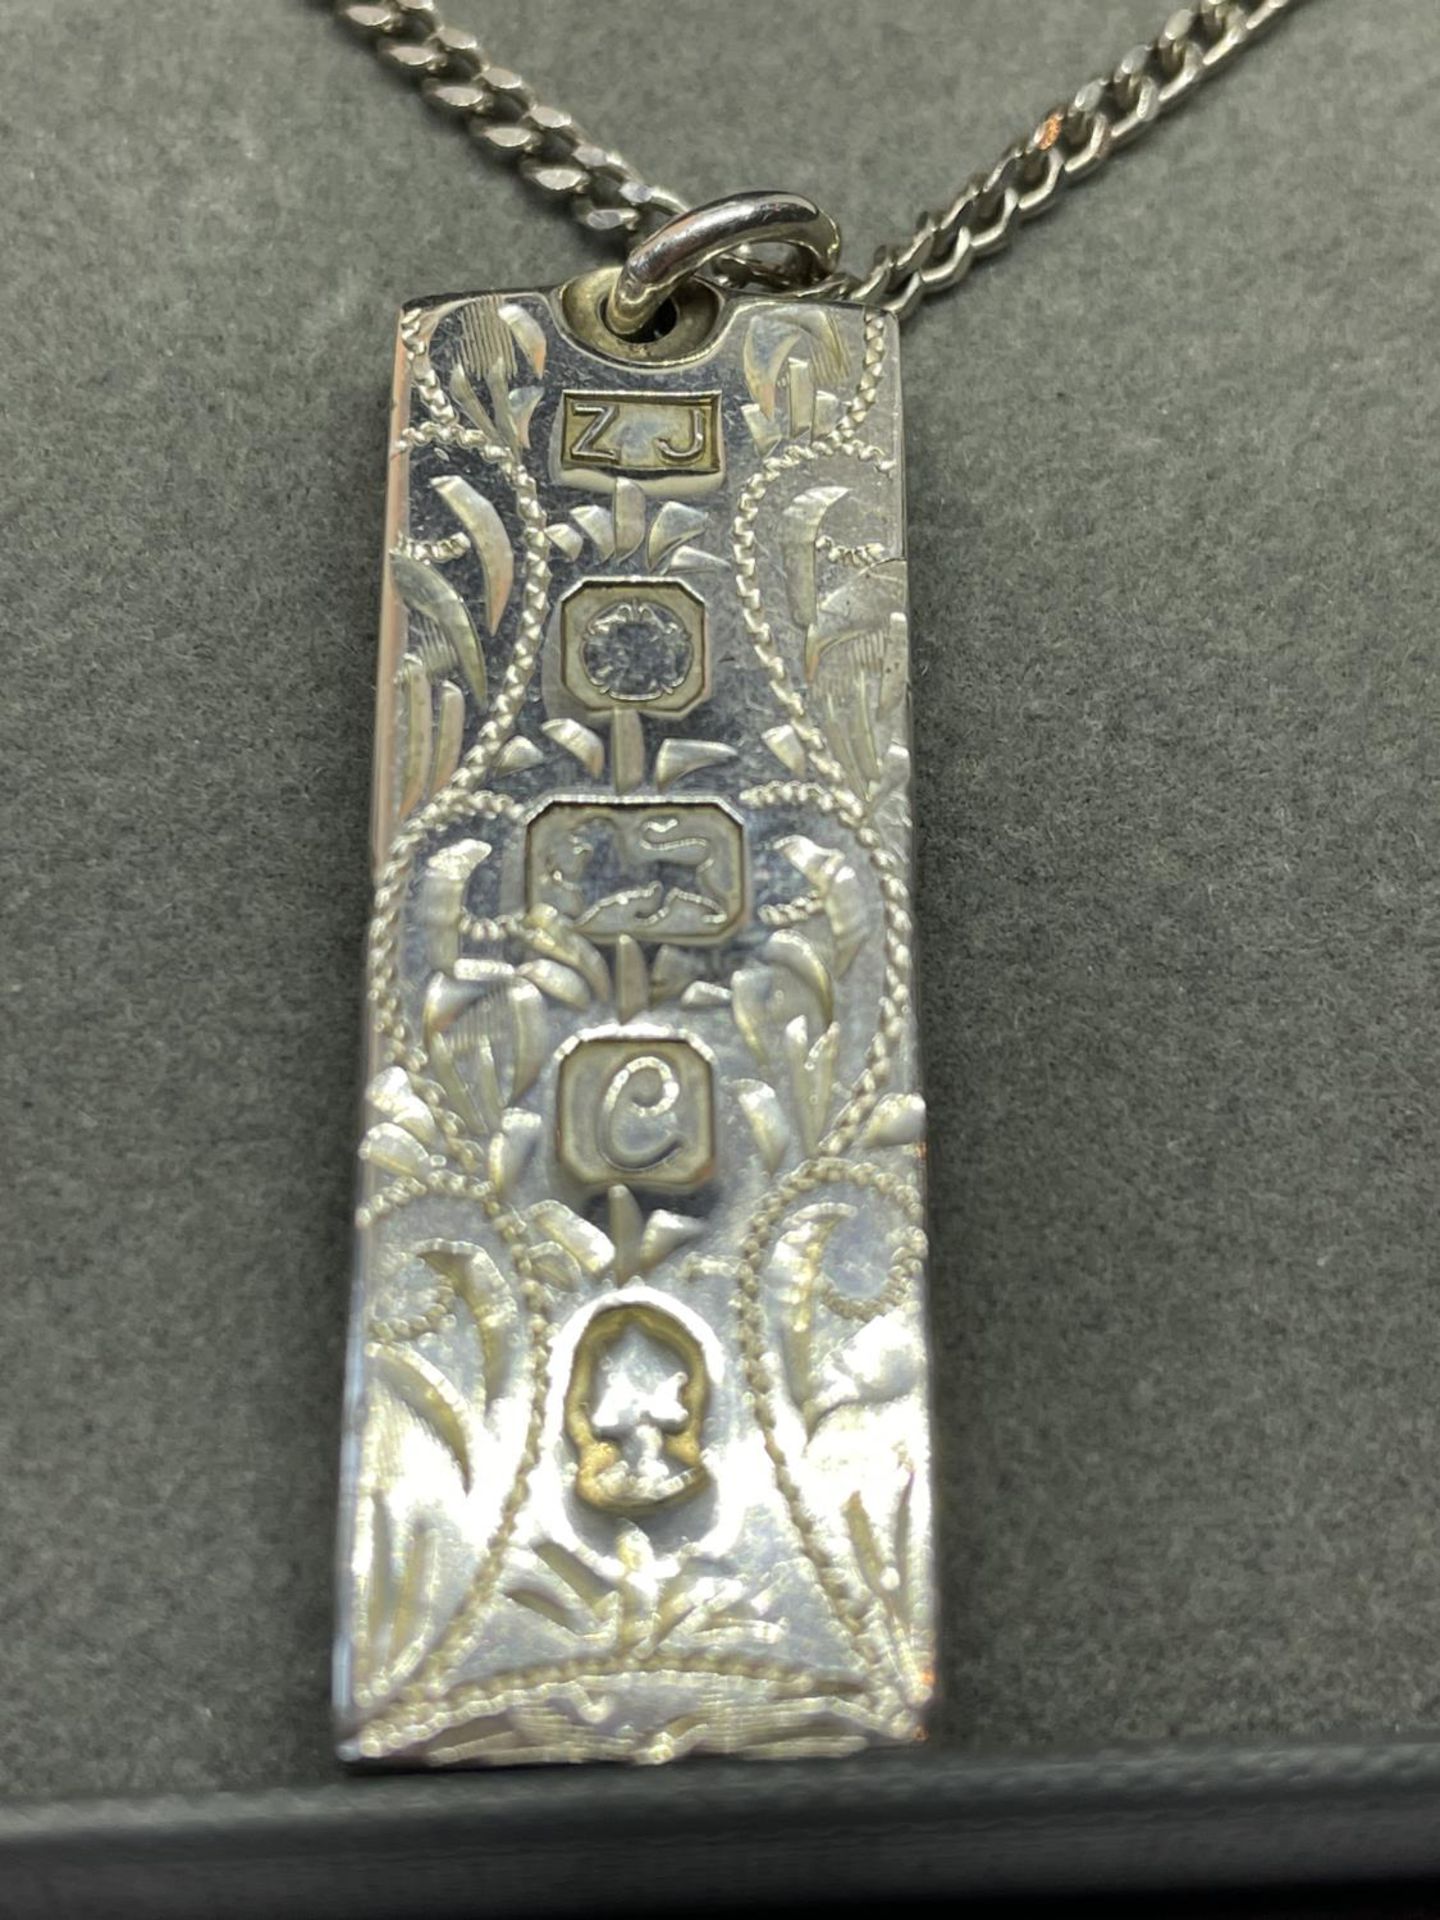 AN ORNATE SILVER INGOT AND CHAIN IN A PRESENTATION BOX - Image 2 of 3